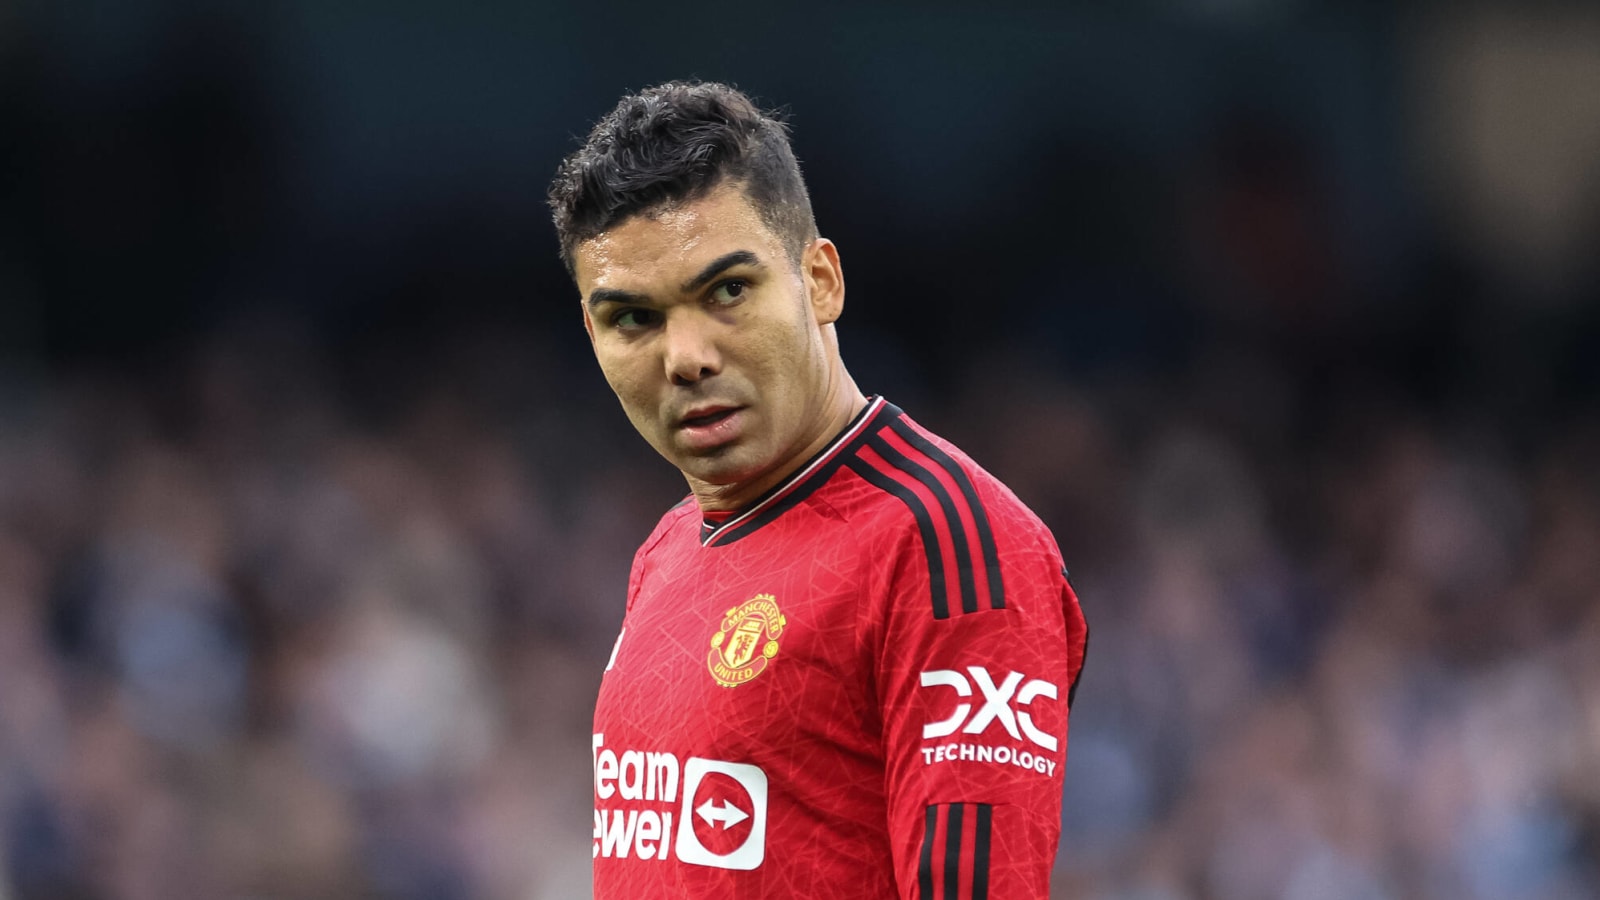 ‘That is criminal’ – Paul Scholes slams Man United star for his mistake against Man City